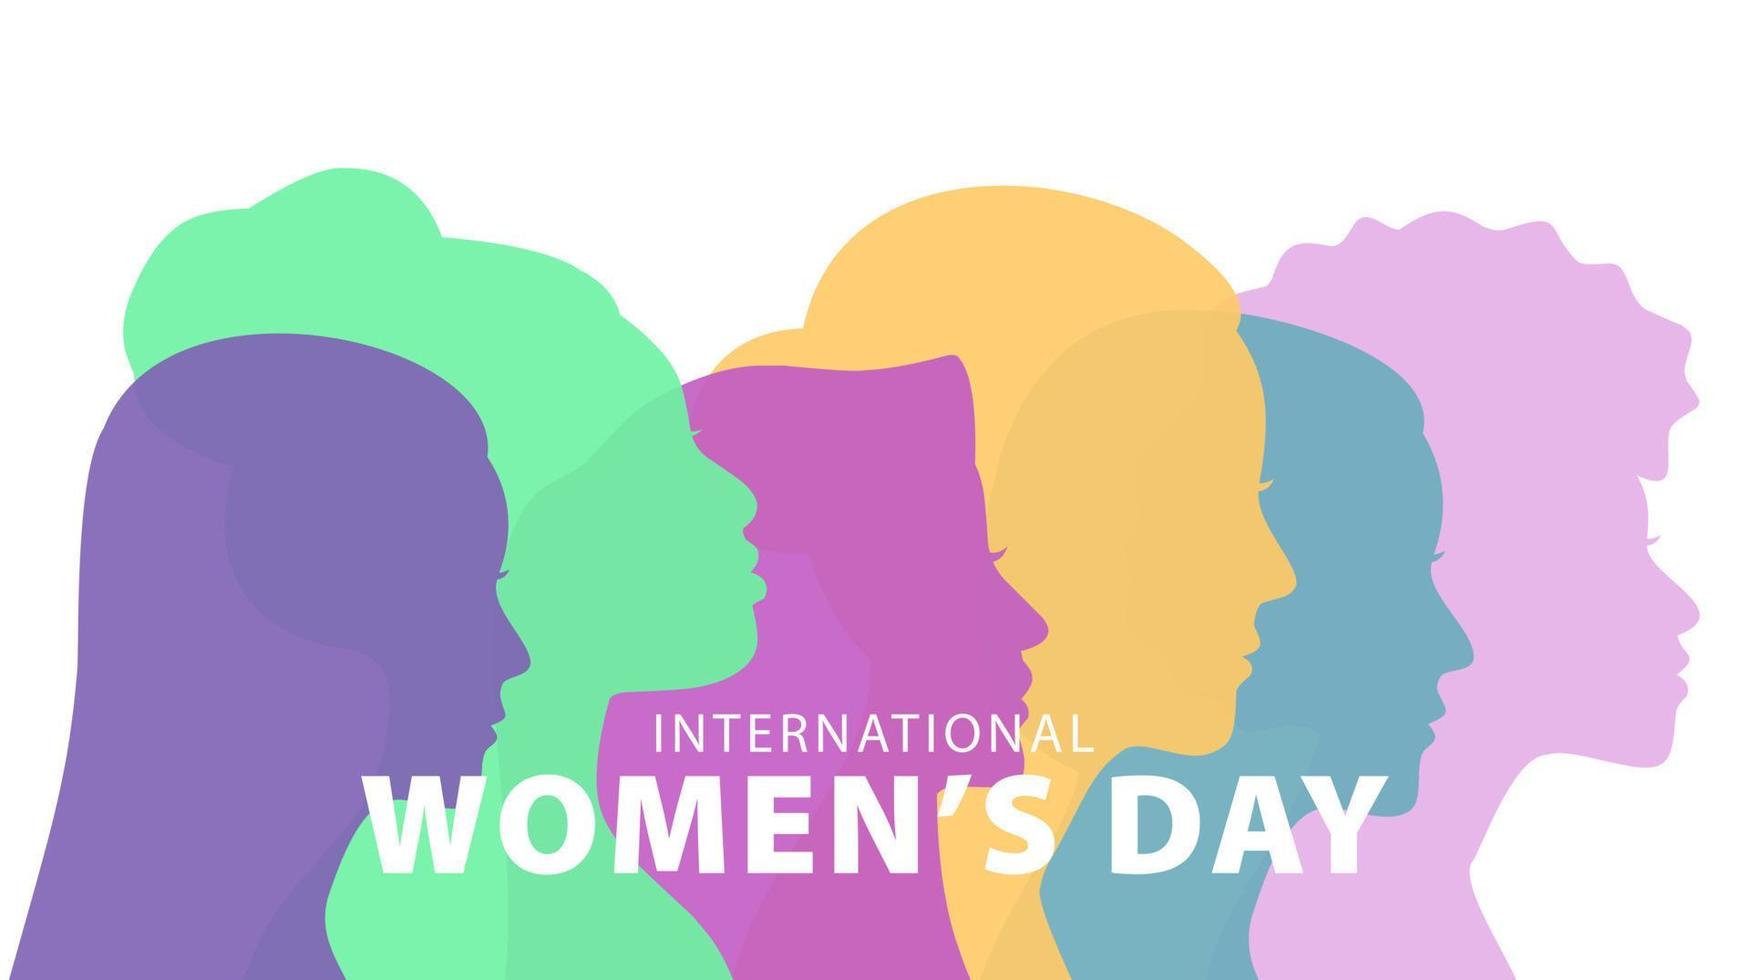 International women's day banner. Woman silhouette flat design. Concept of feminism, women's day, equality. Vector illustration